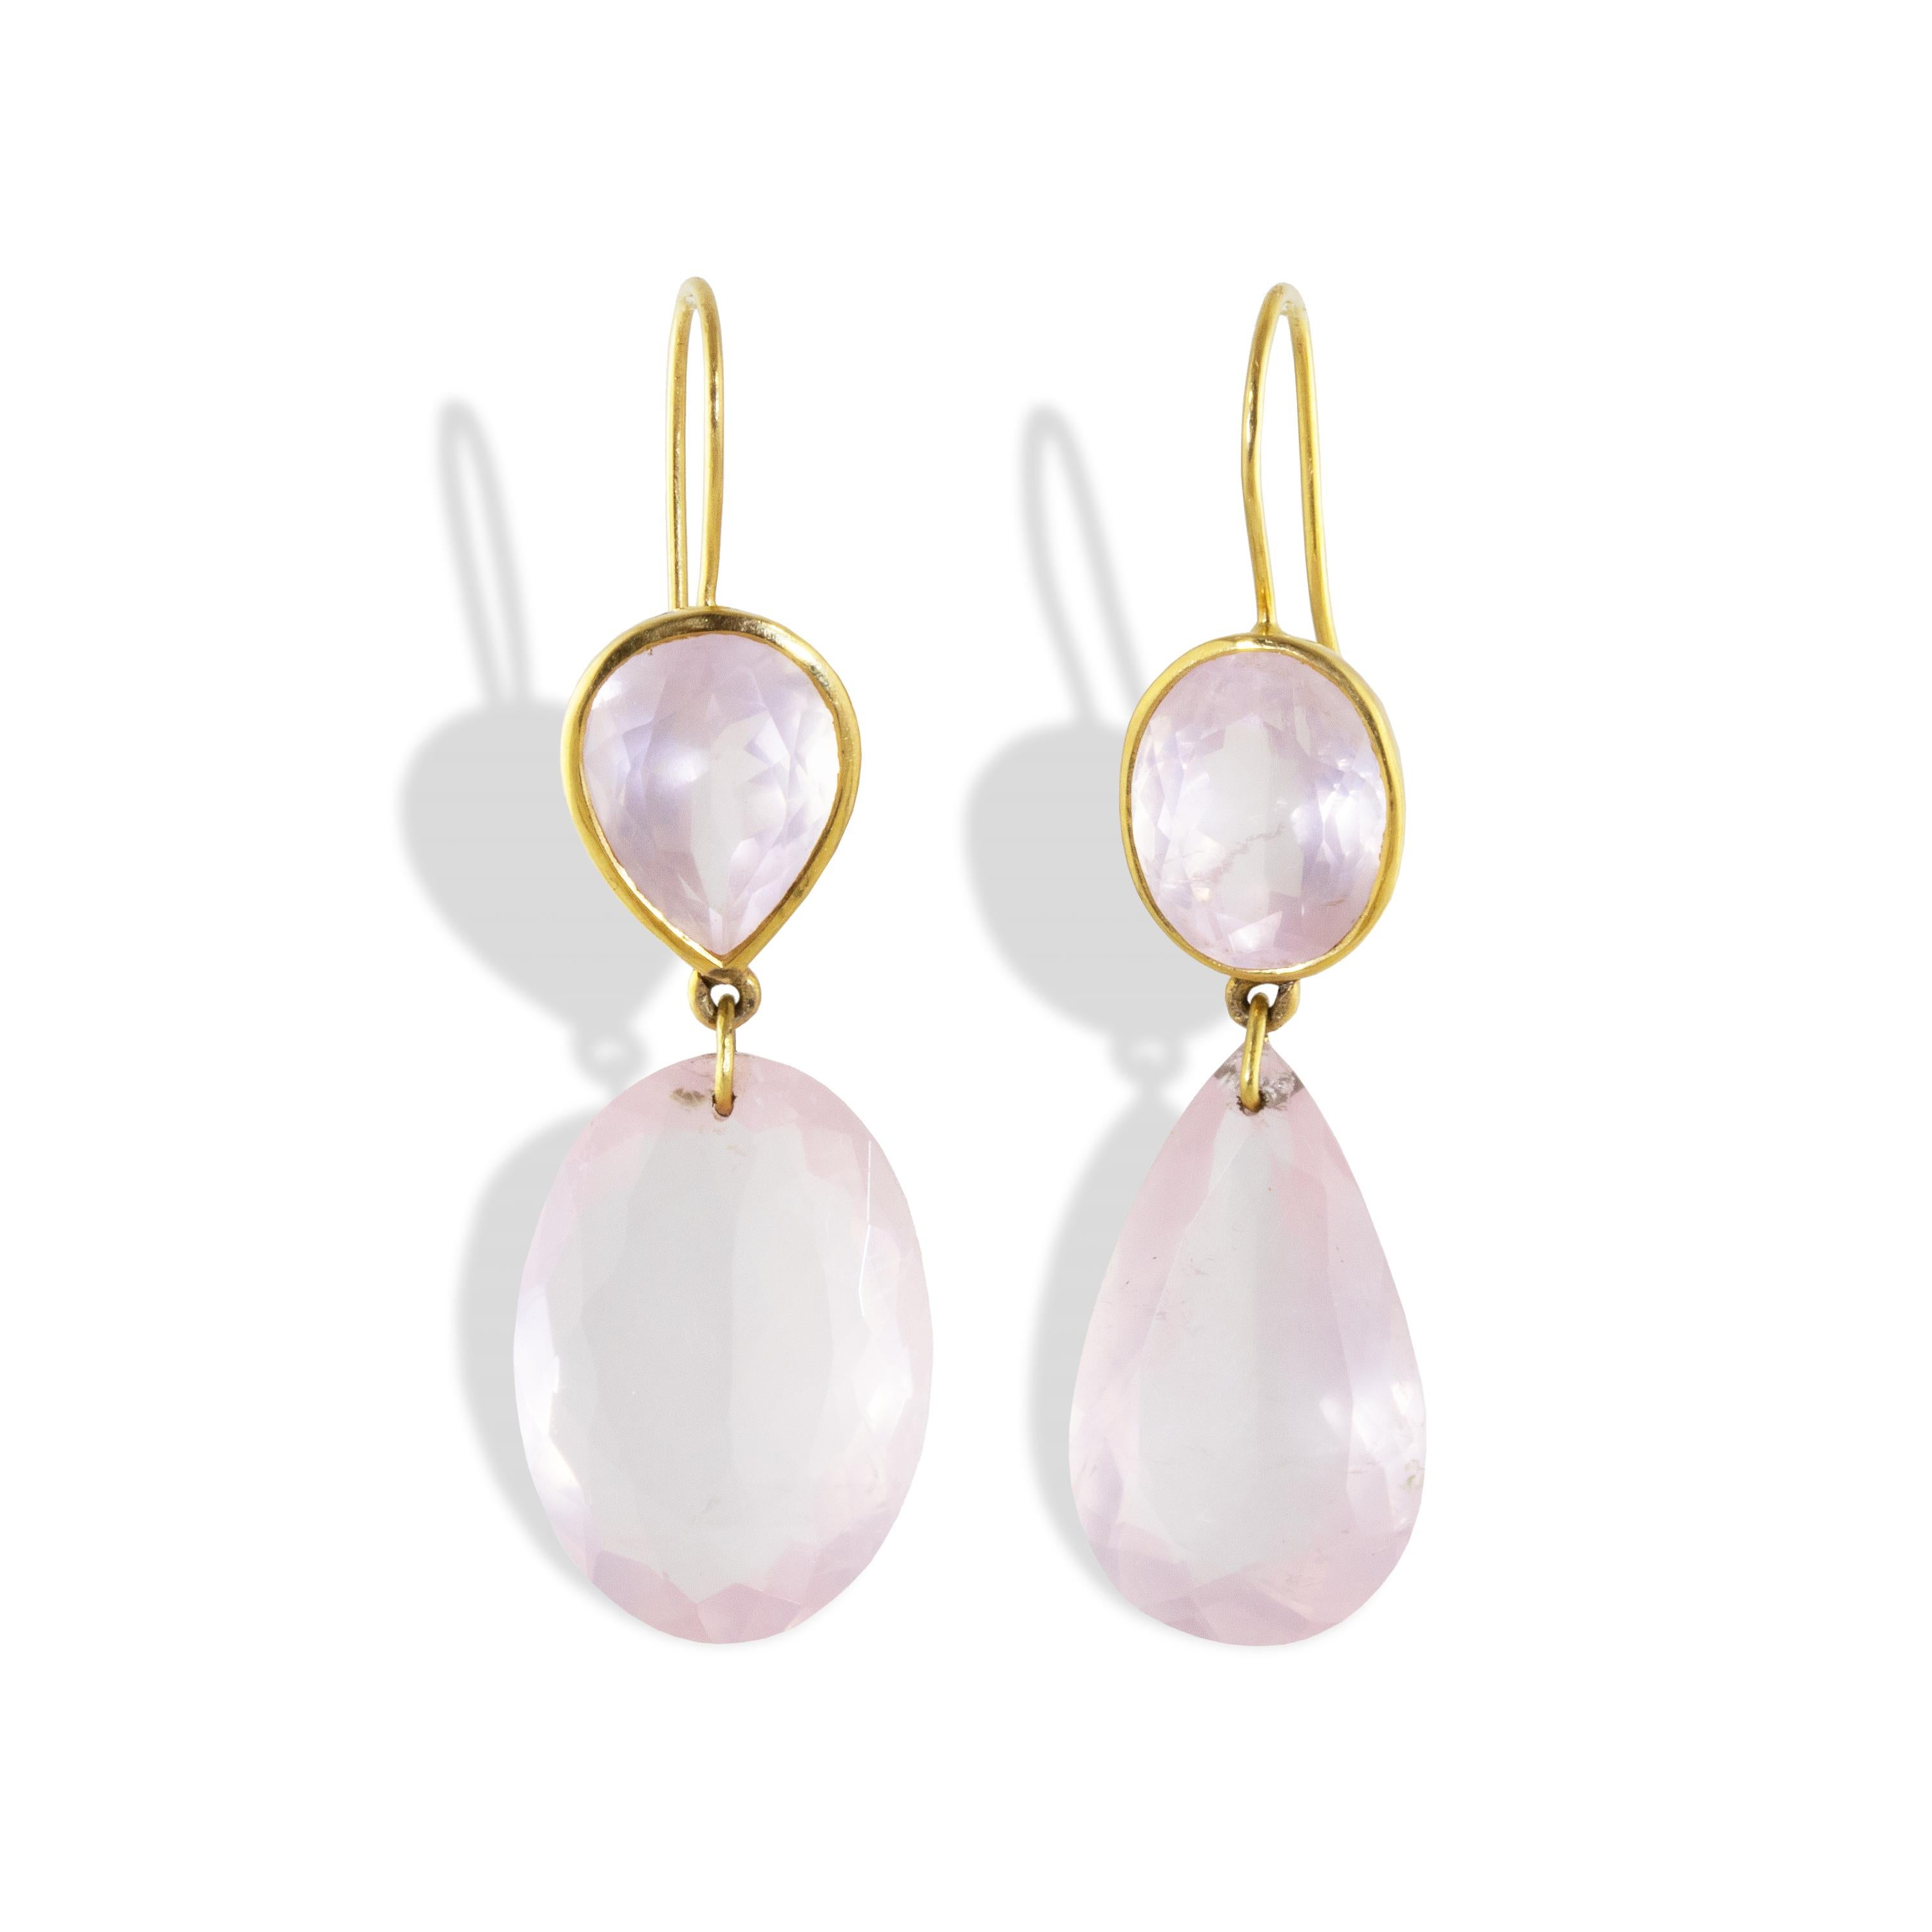 An asymmetrical pair of Rose Quartz wave  earrings featuring oval and pear shaped gemstones. Set in a high polish 18k gold with a wavy bezel, representing the ocean waves.

One of a kind

Rose Quartz is the stone of universal love. It restores trust